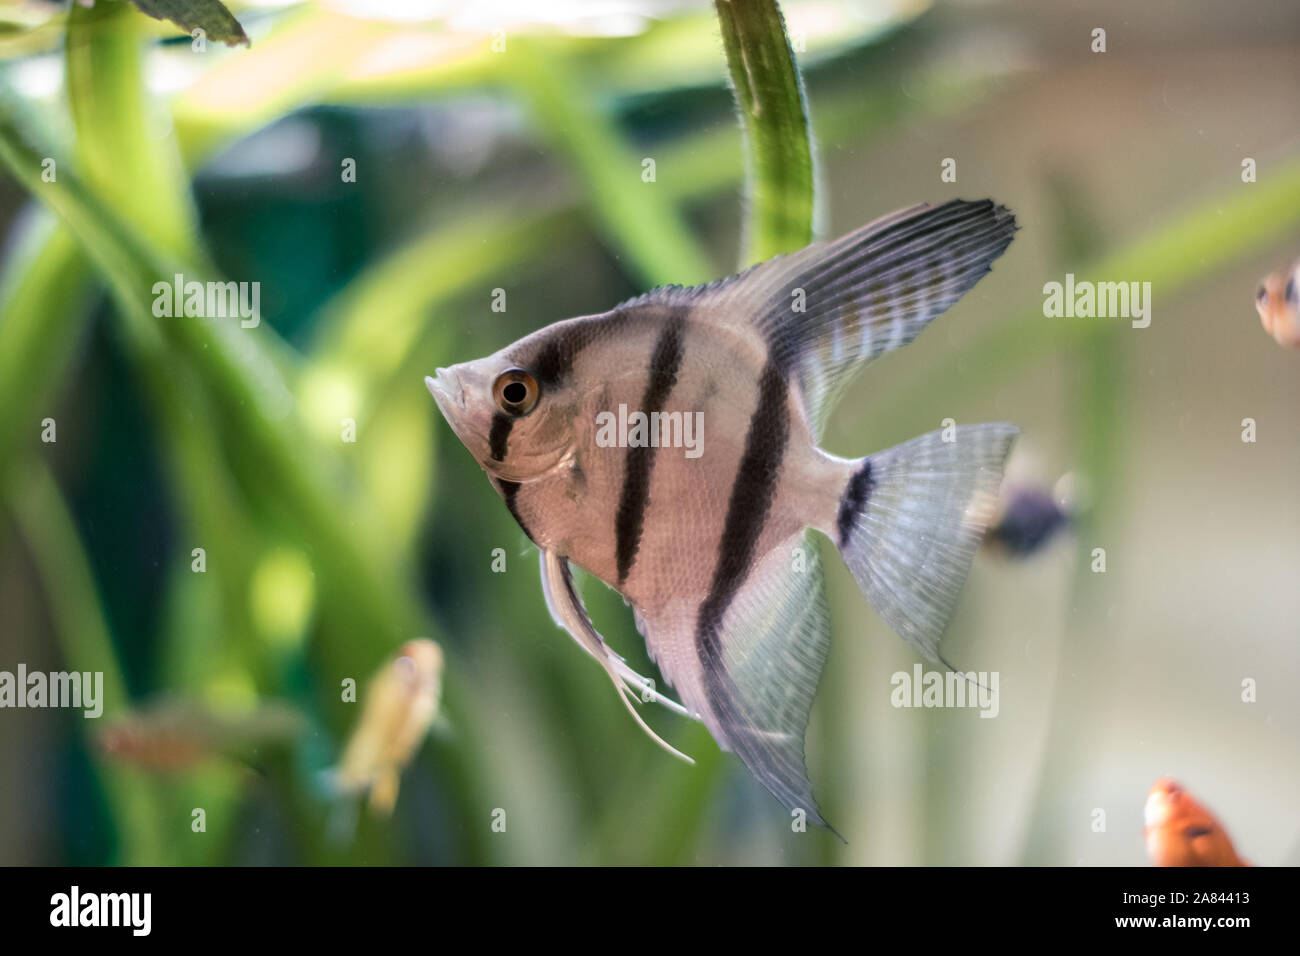 White striped betta fish close up on a green blurry background Stock Photo